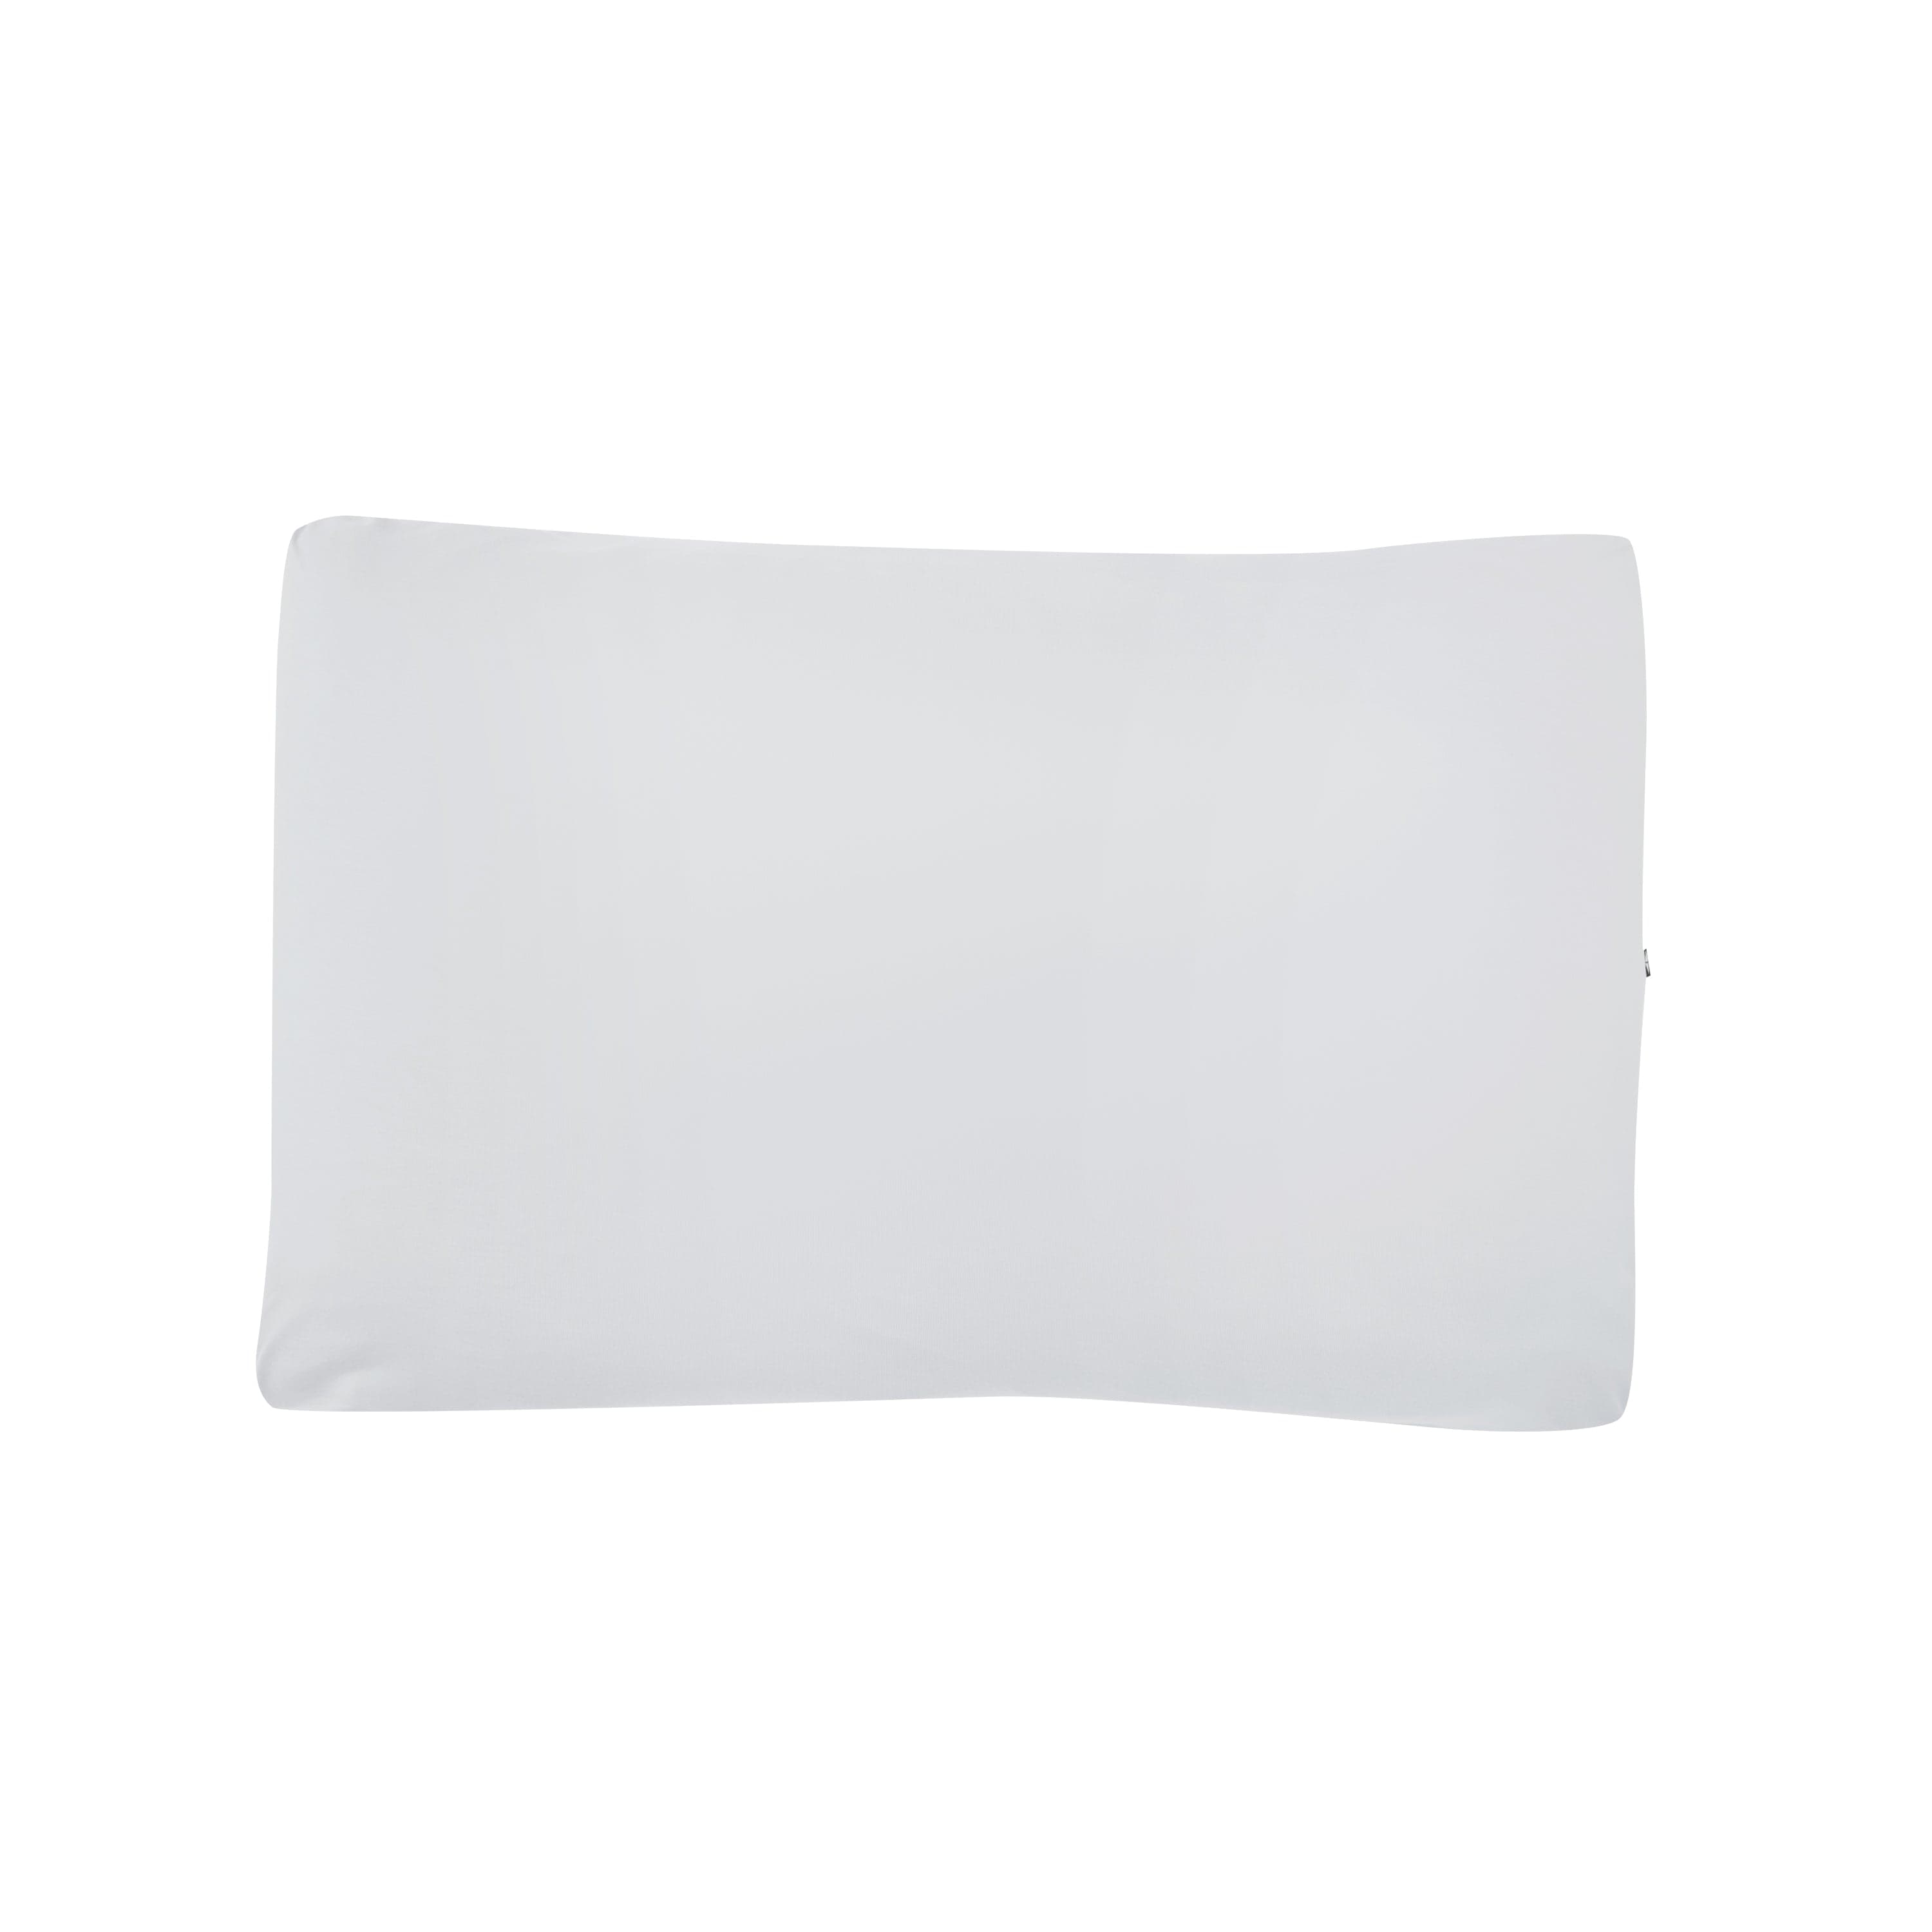 Kyte Baby King Pillow Case Storm / King King Pillowcase in Storm